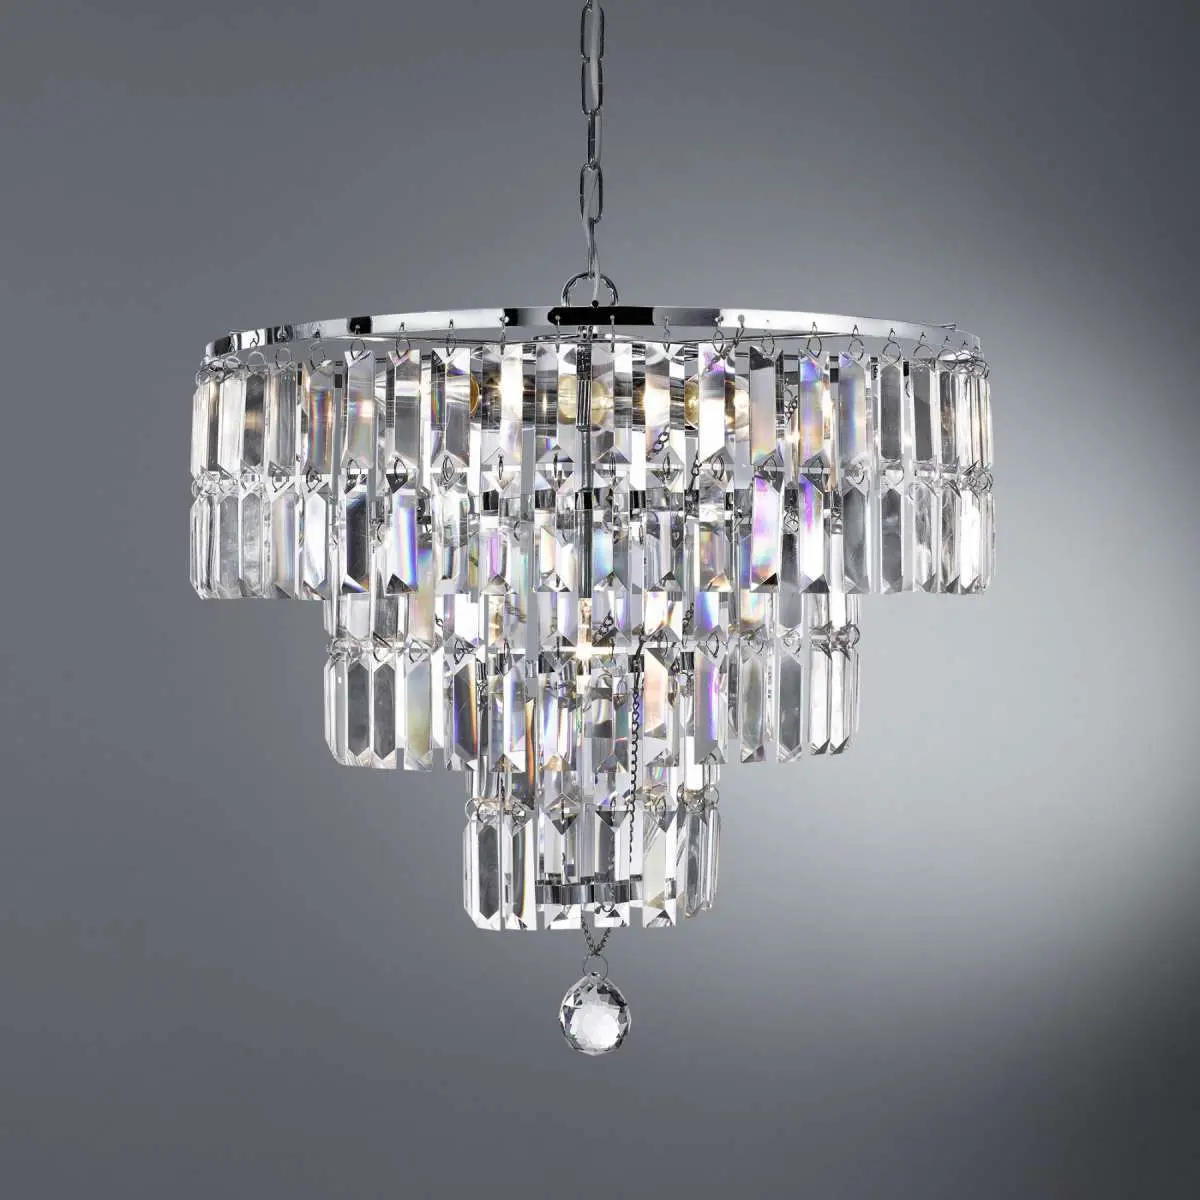 Empire Chrome 5 Light Chandelier With Bevelled Crystal Coffin Drops